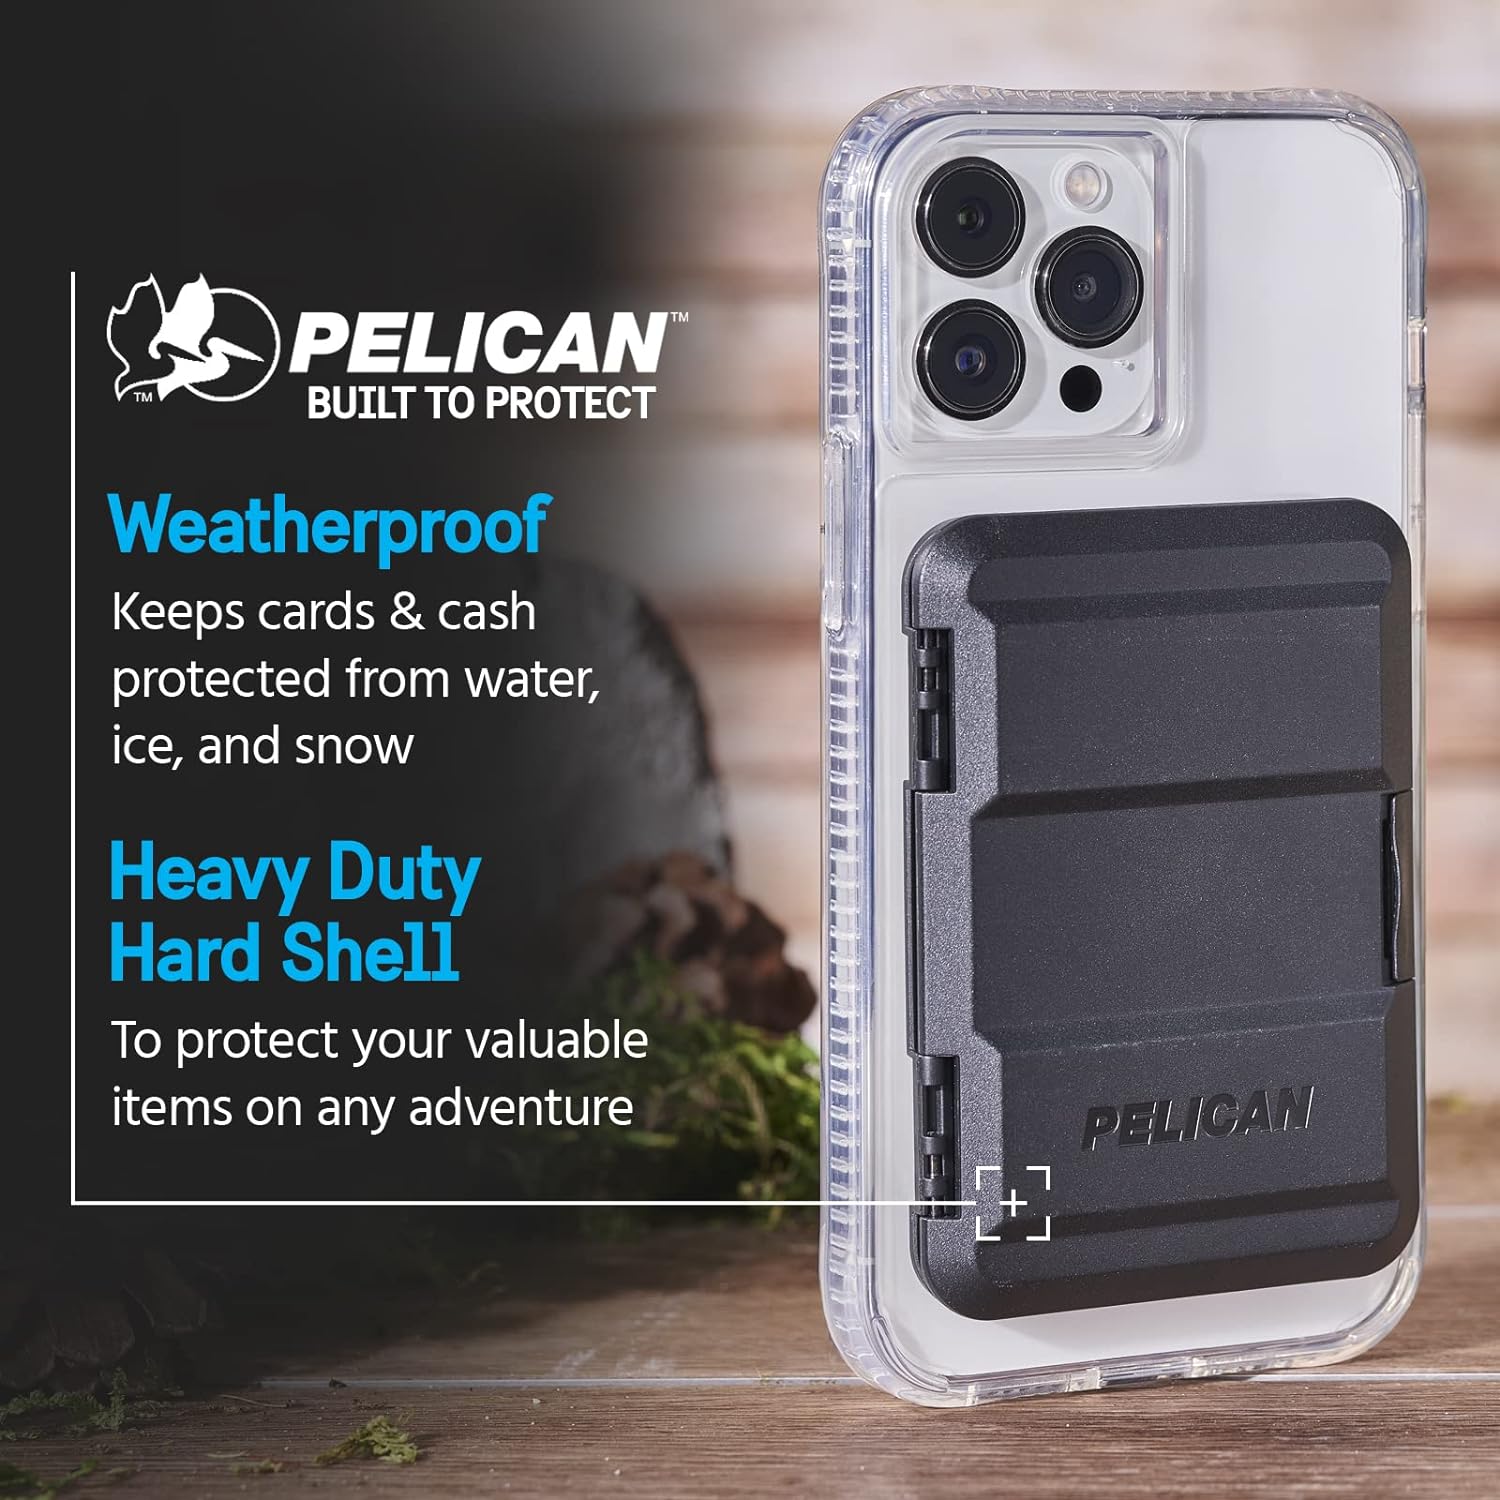 Pelican Magnetic Wallet Card Holder for iPhone 15 Pro Max/ 15 Pro/ 15/ 14 Pro Max/ 14 Pro/ 13 Pro Max - Detachable Protective Light Weight MagSafe Wallet - Black